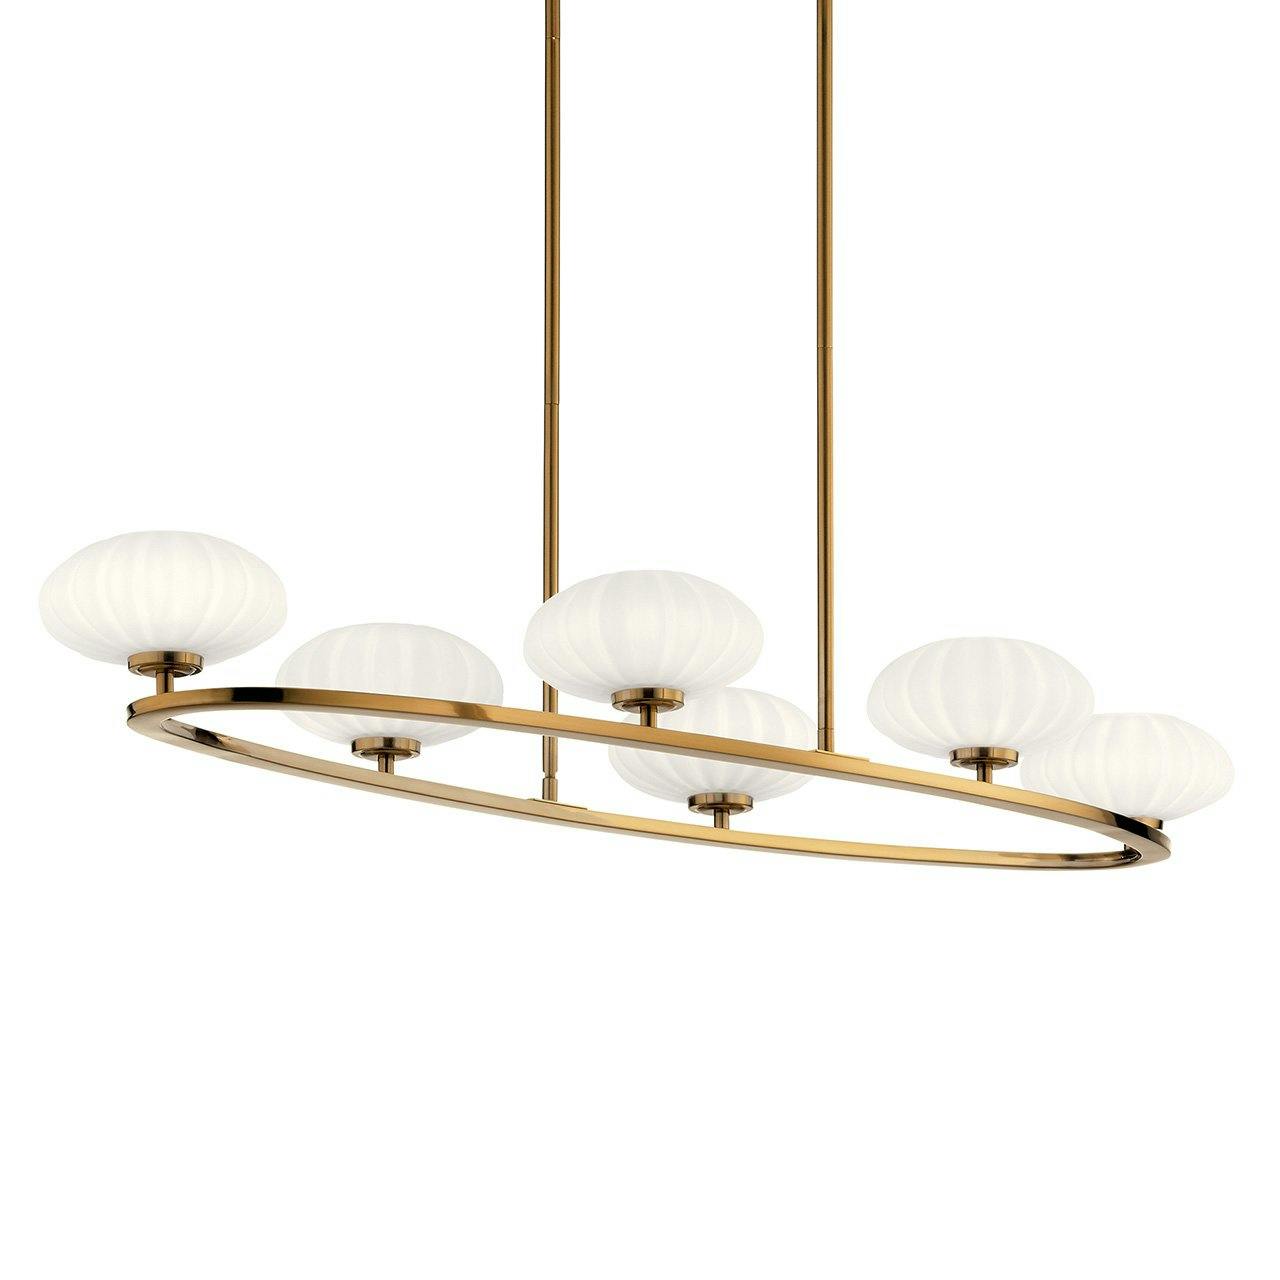 Pim 39" 6 Light Oval Chandelier in Gold without the canopy on a white background